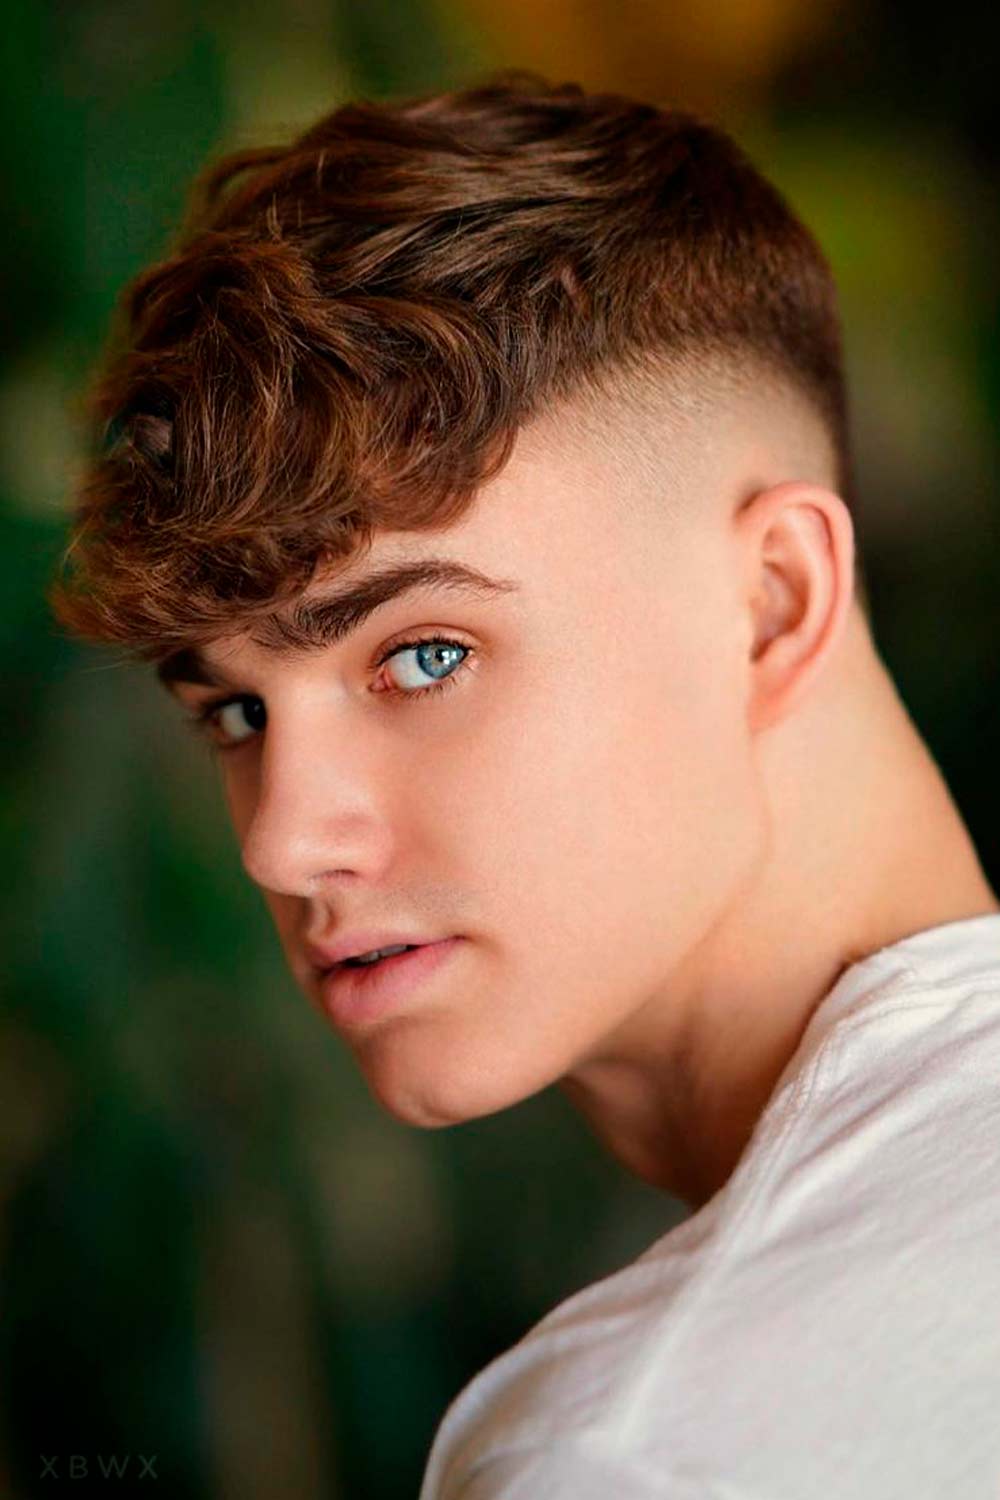 Curly Hairstyles For Men - Our Top 10 | Friseur.com